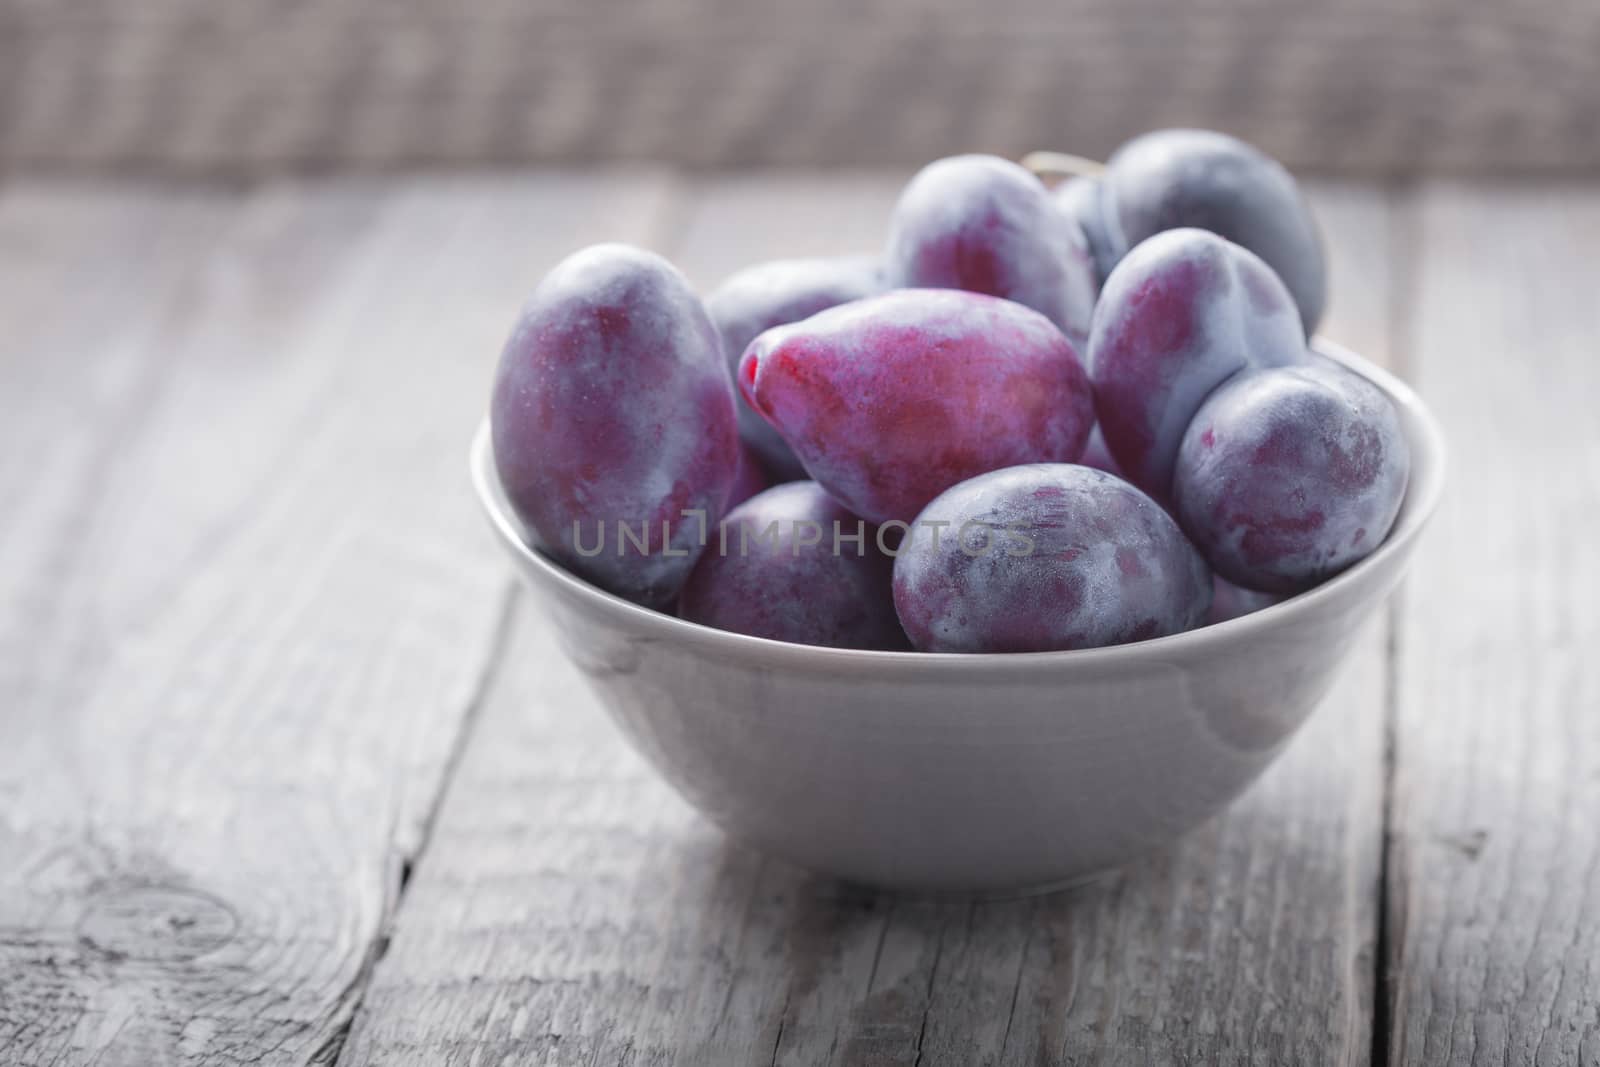 Bunch of Plums on a wooden table by supercat67